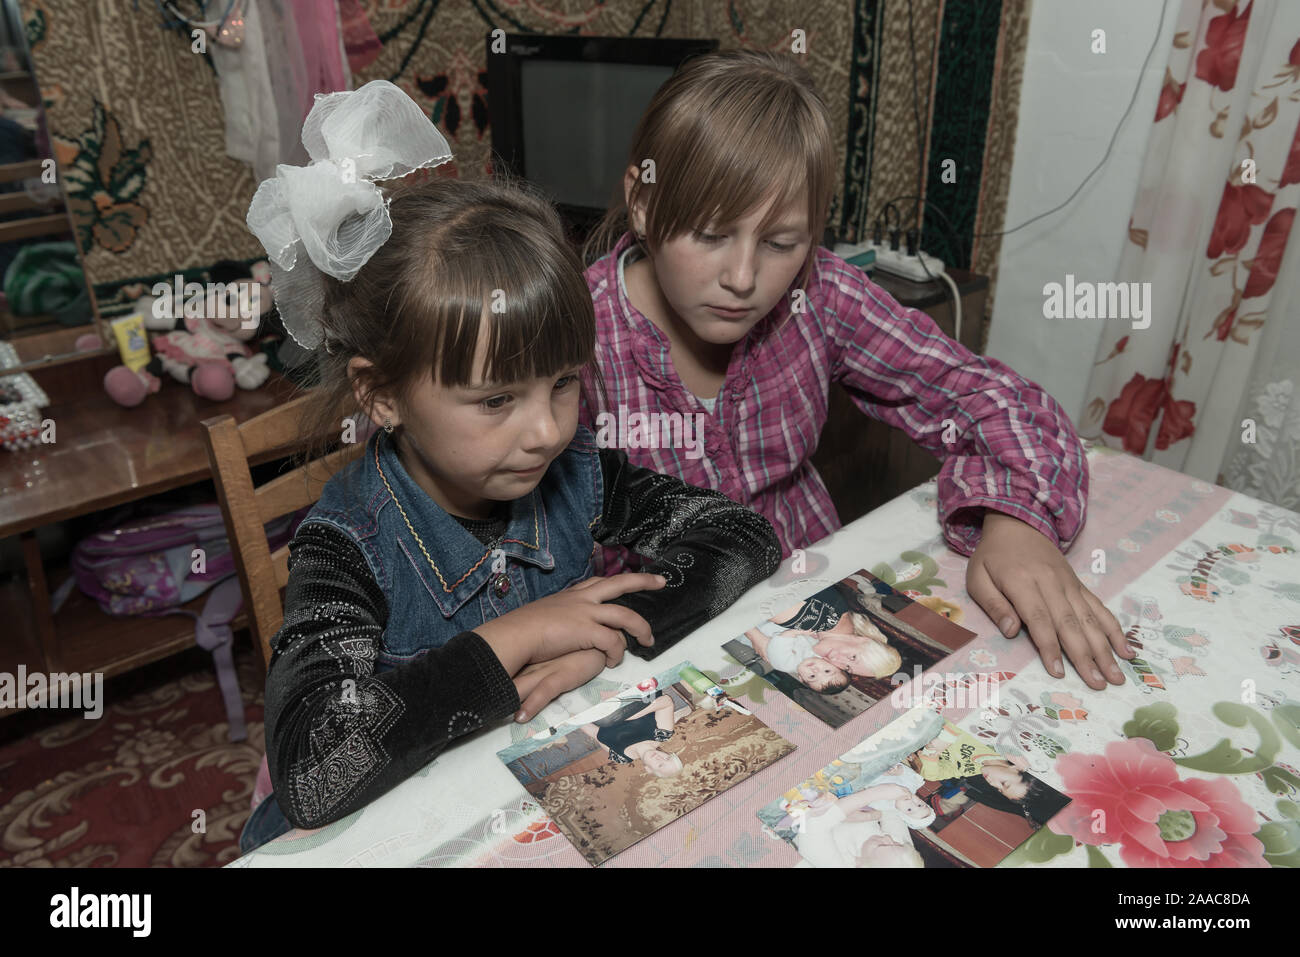 Sisters looking at photos of their mother who works in another country as a migrant worker.  The girls are looked after by their grandmother Stock Photo